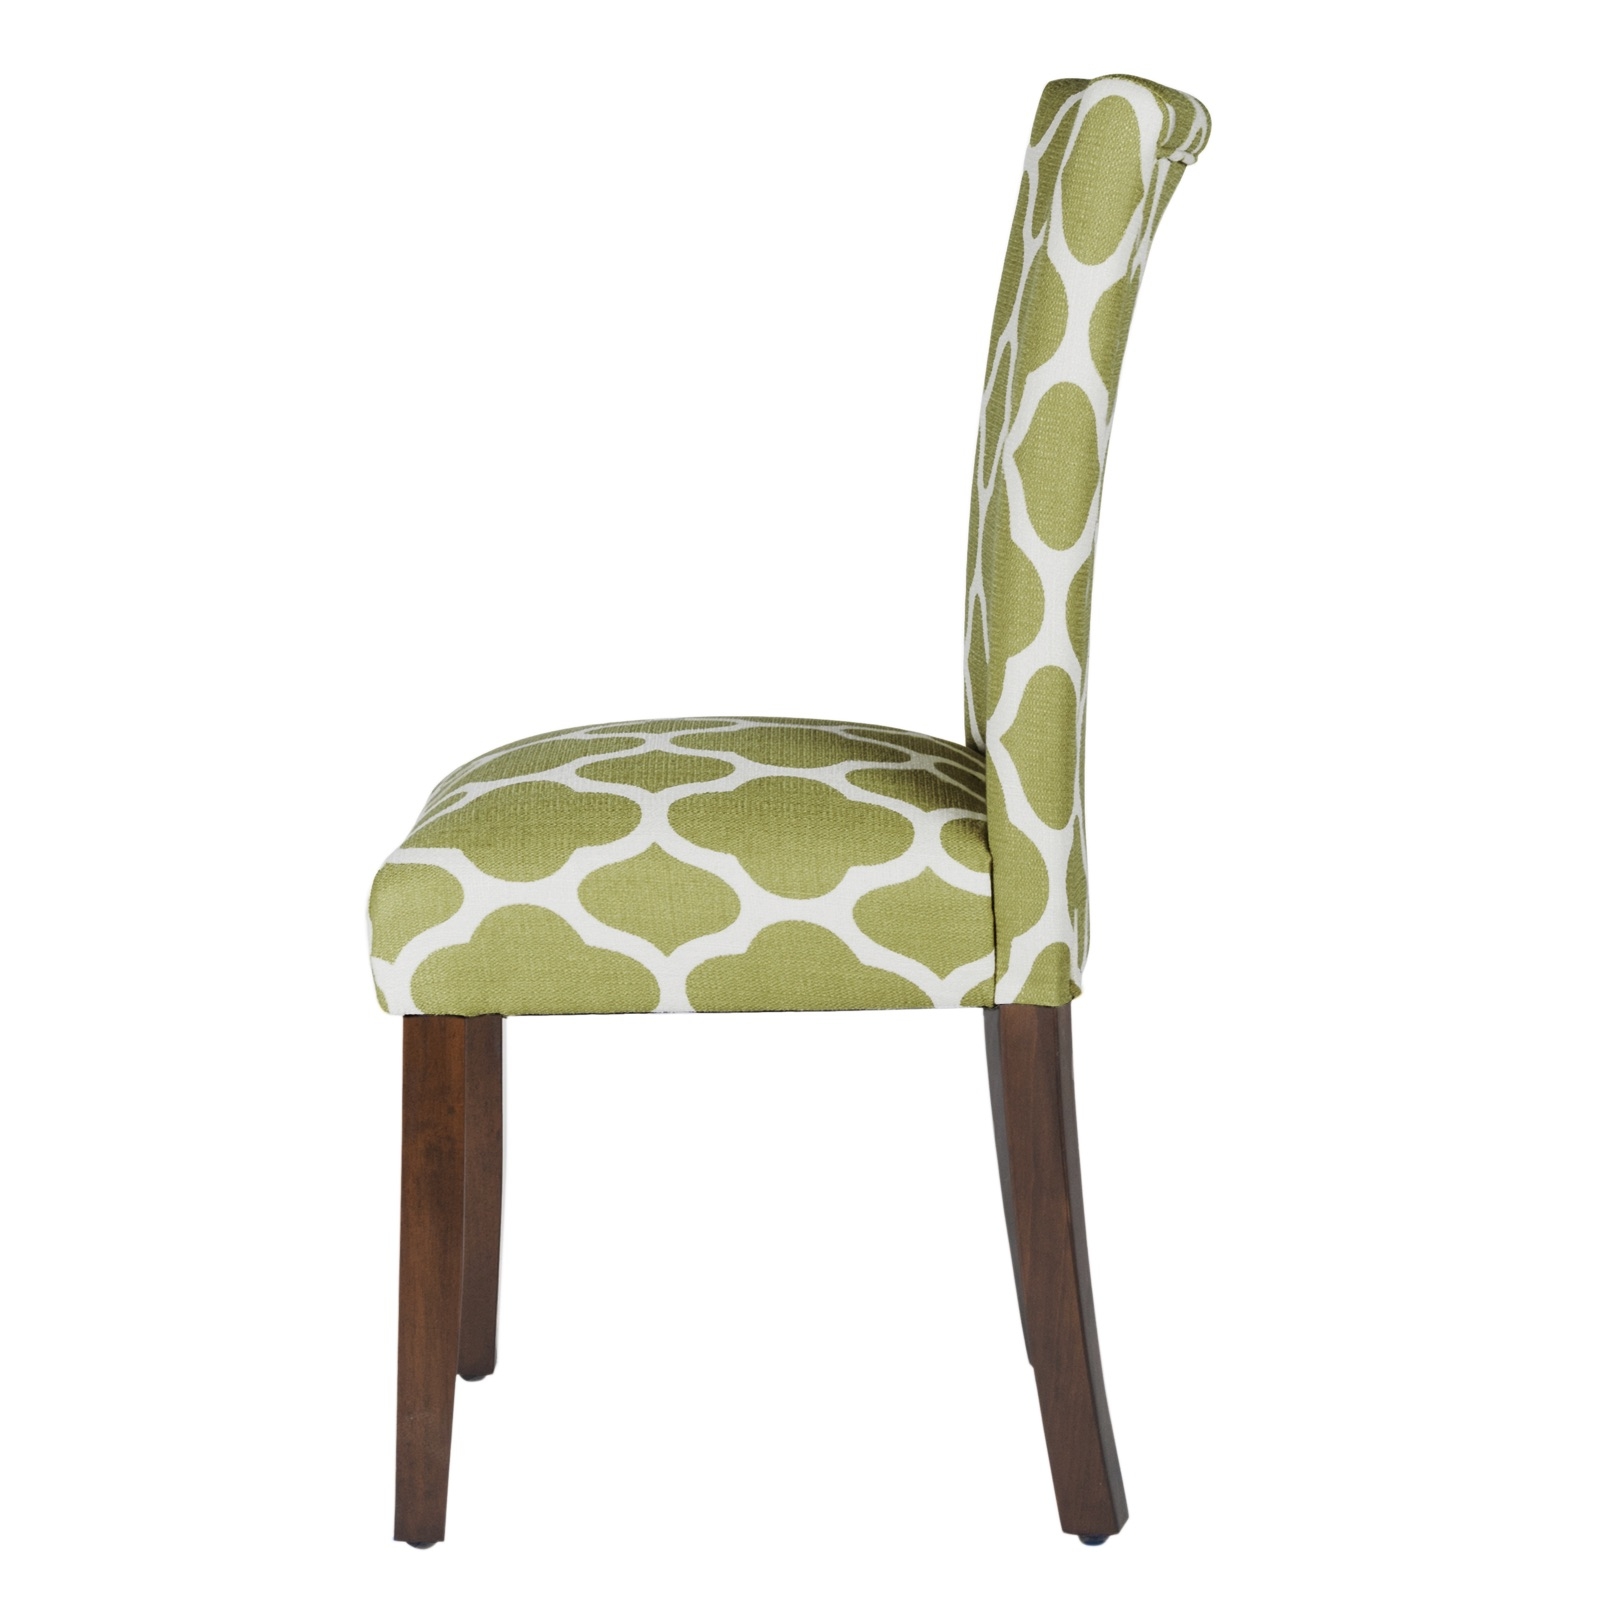 Wooden Parson Dining Chair With Quatrefoil Pattern Fabric Upholstery, Green And White, Set Of Two- Saltoro Sherpi